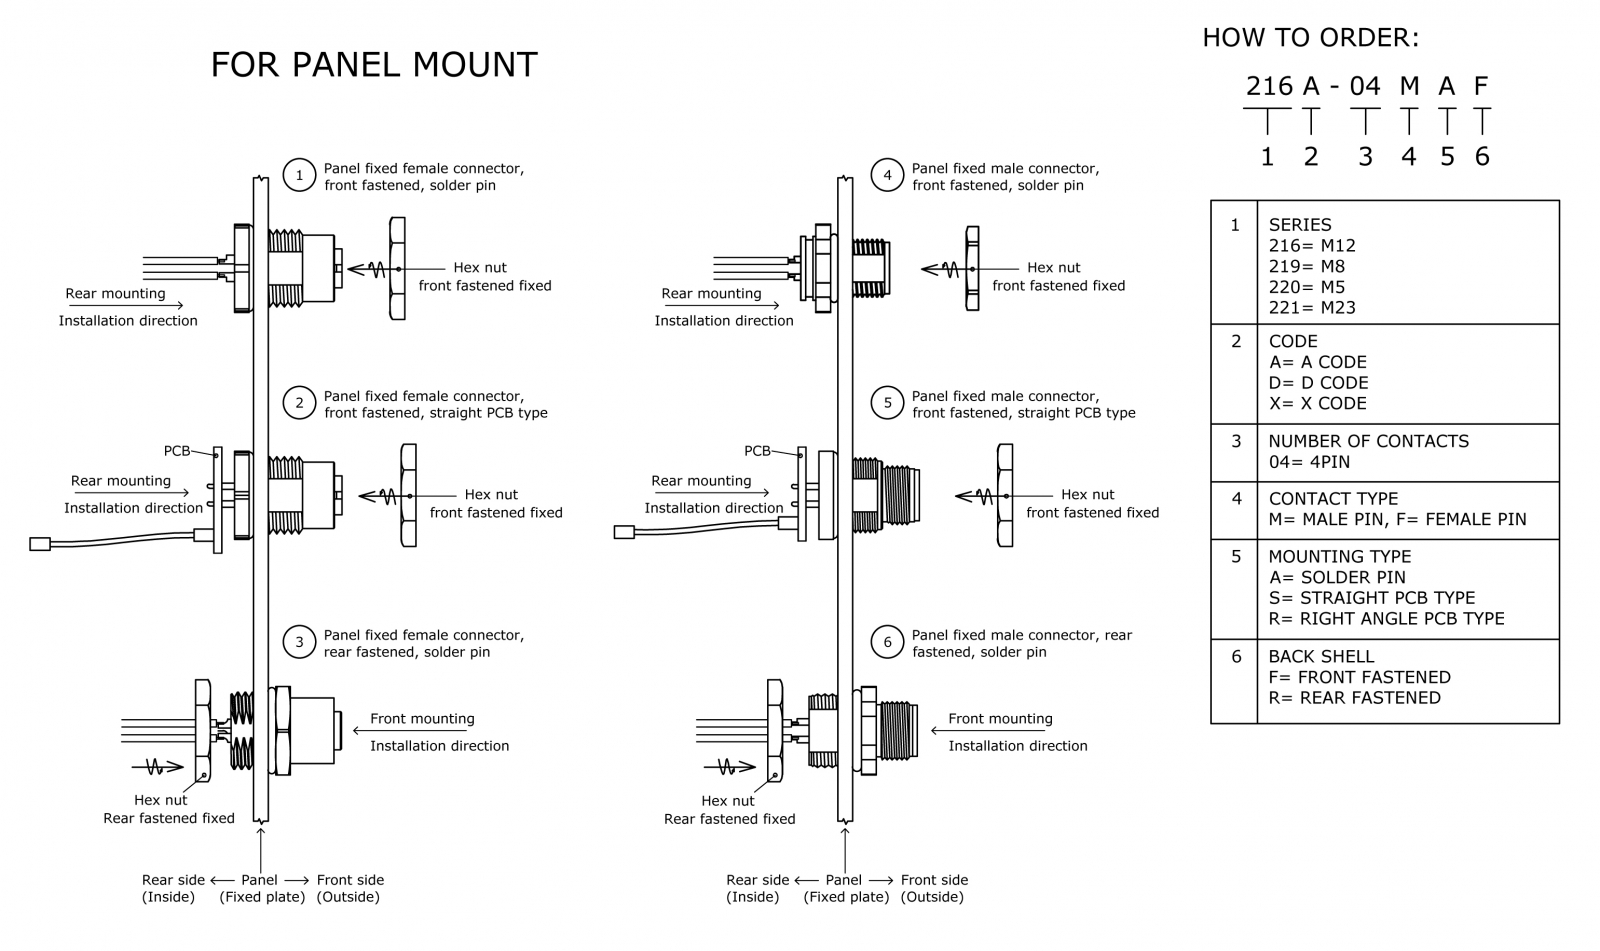 Panel Mount Ordering Instructions